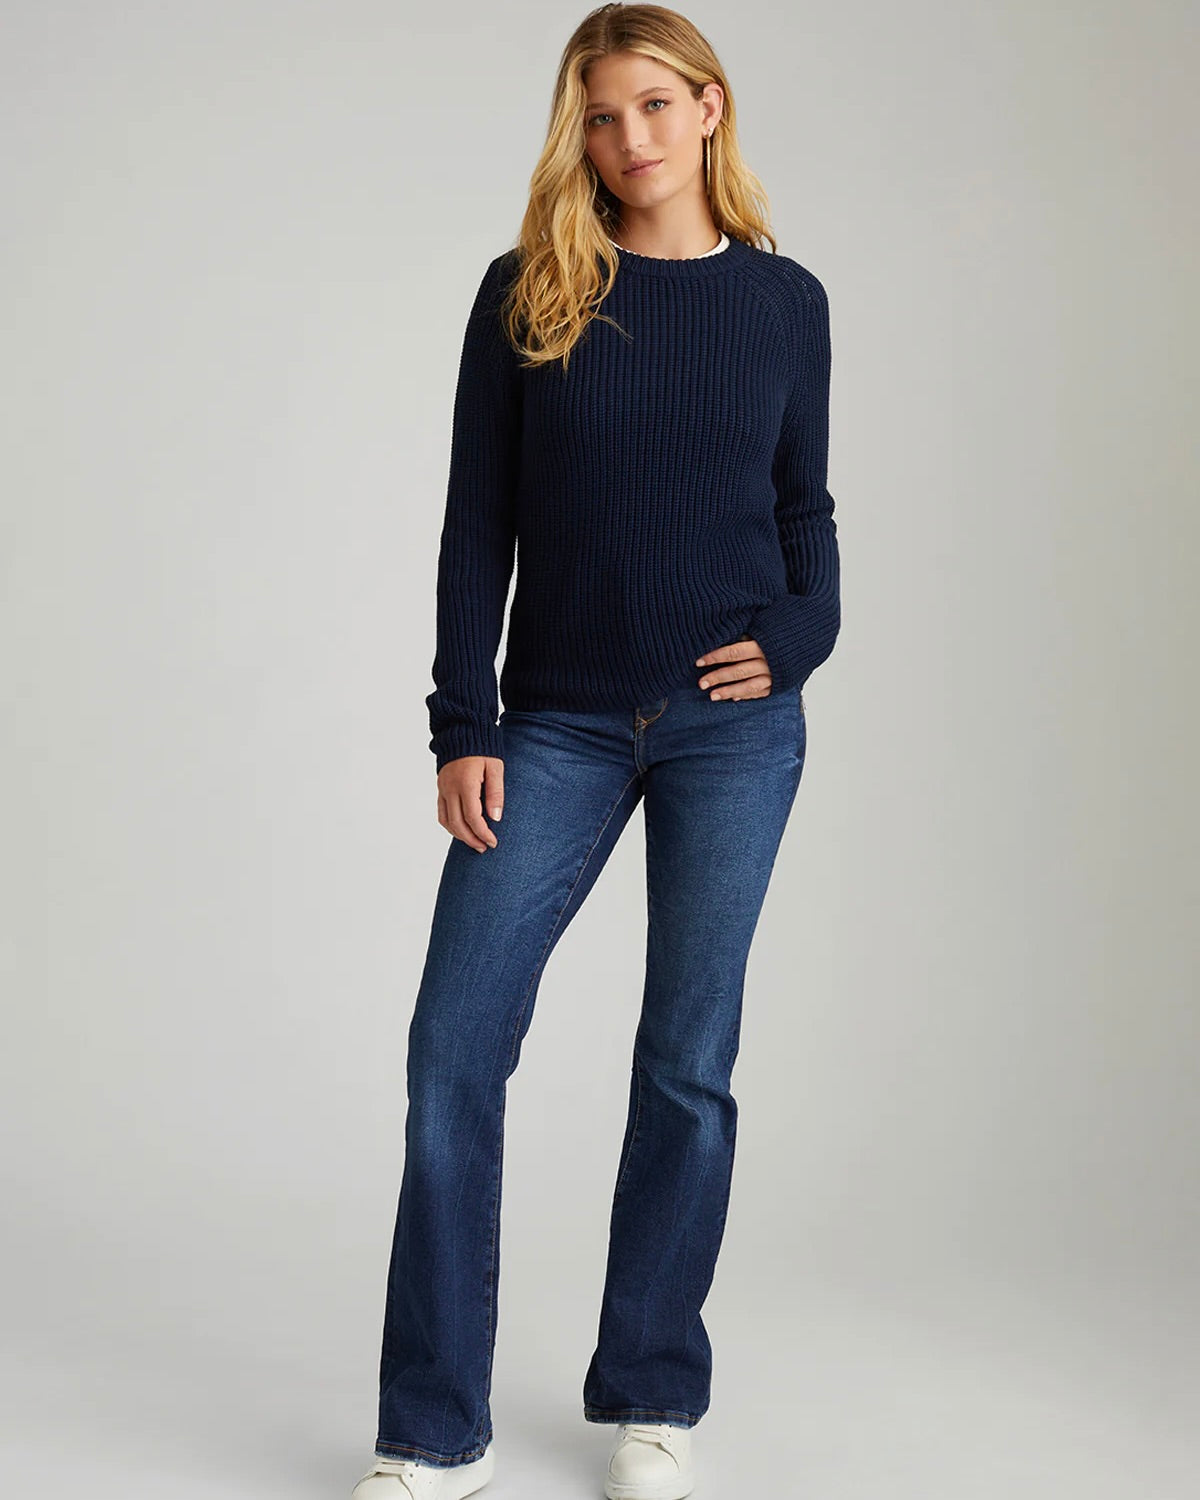 Model wearing 525 America Jane Pullover Sweater in navy wearing jeans on a white background